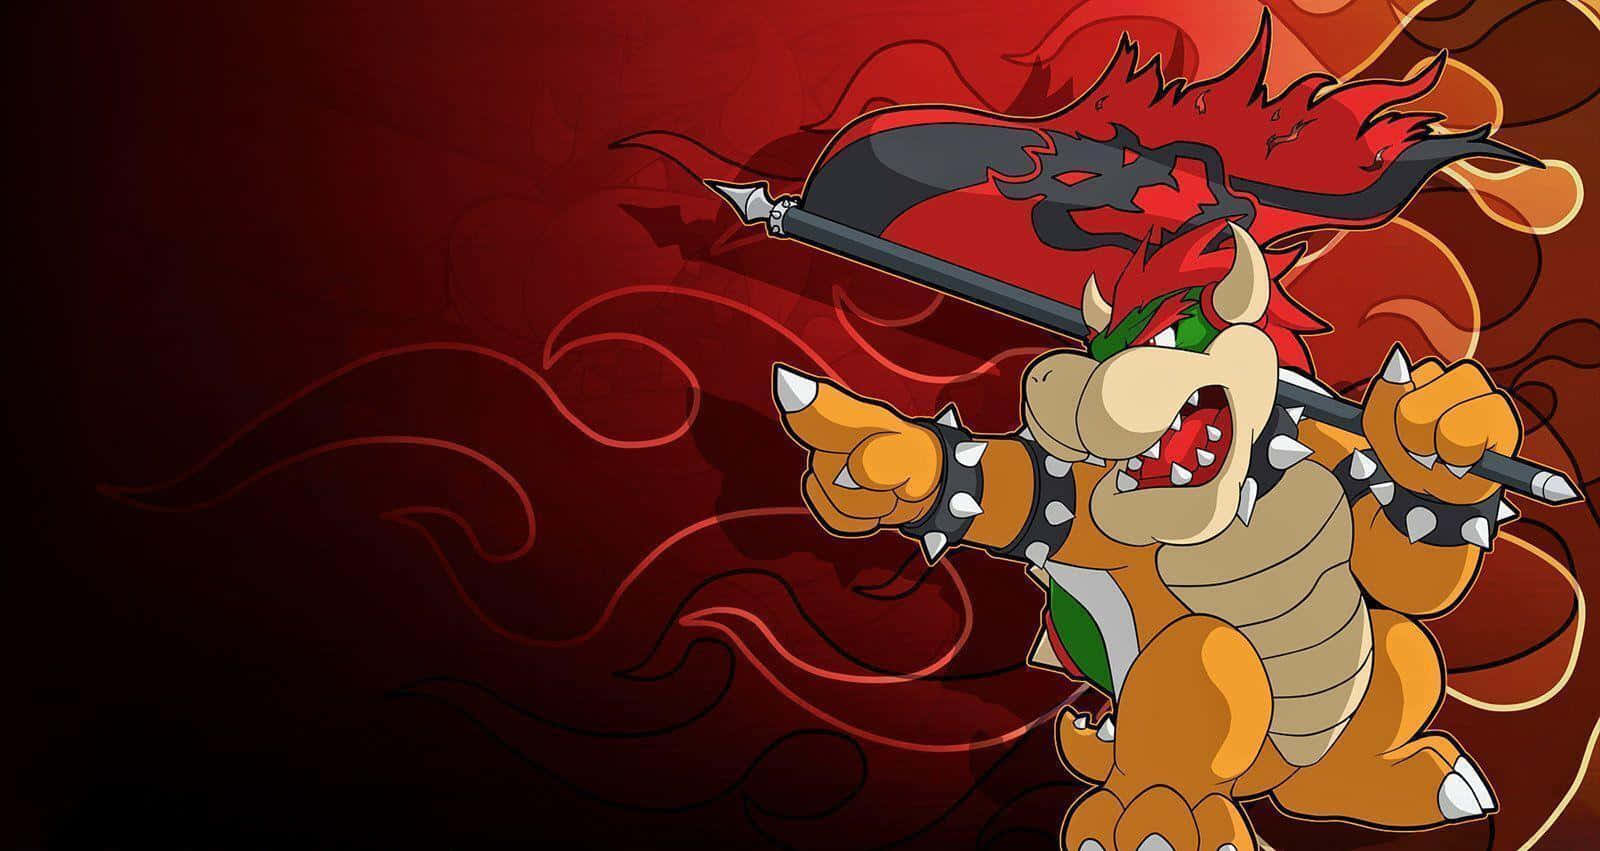 Ferocious King Bowser embarks on his quest for victory! Wallpaper